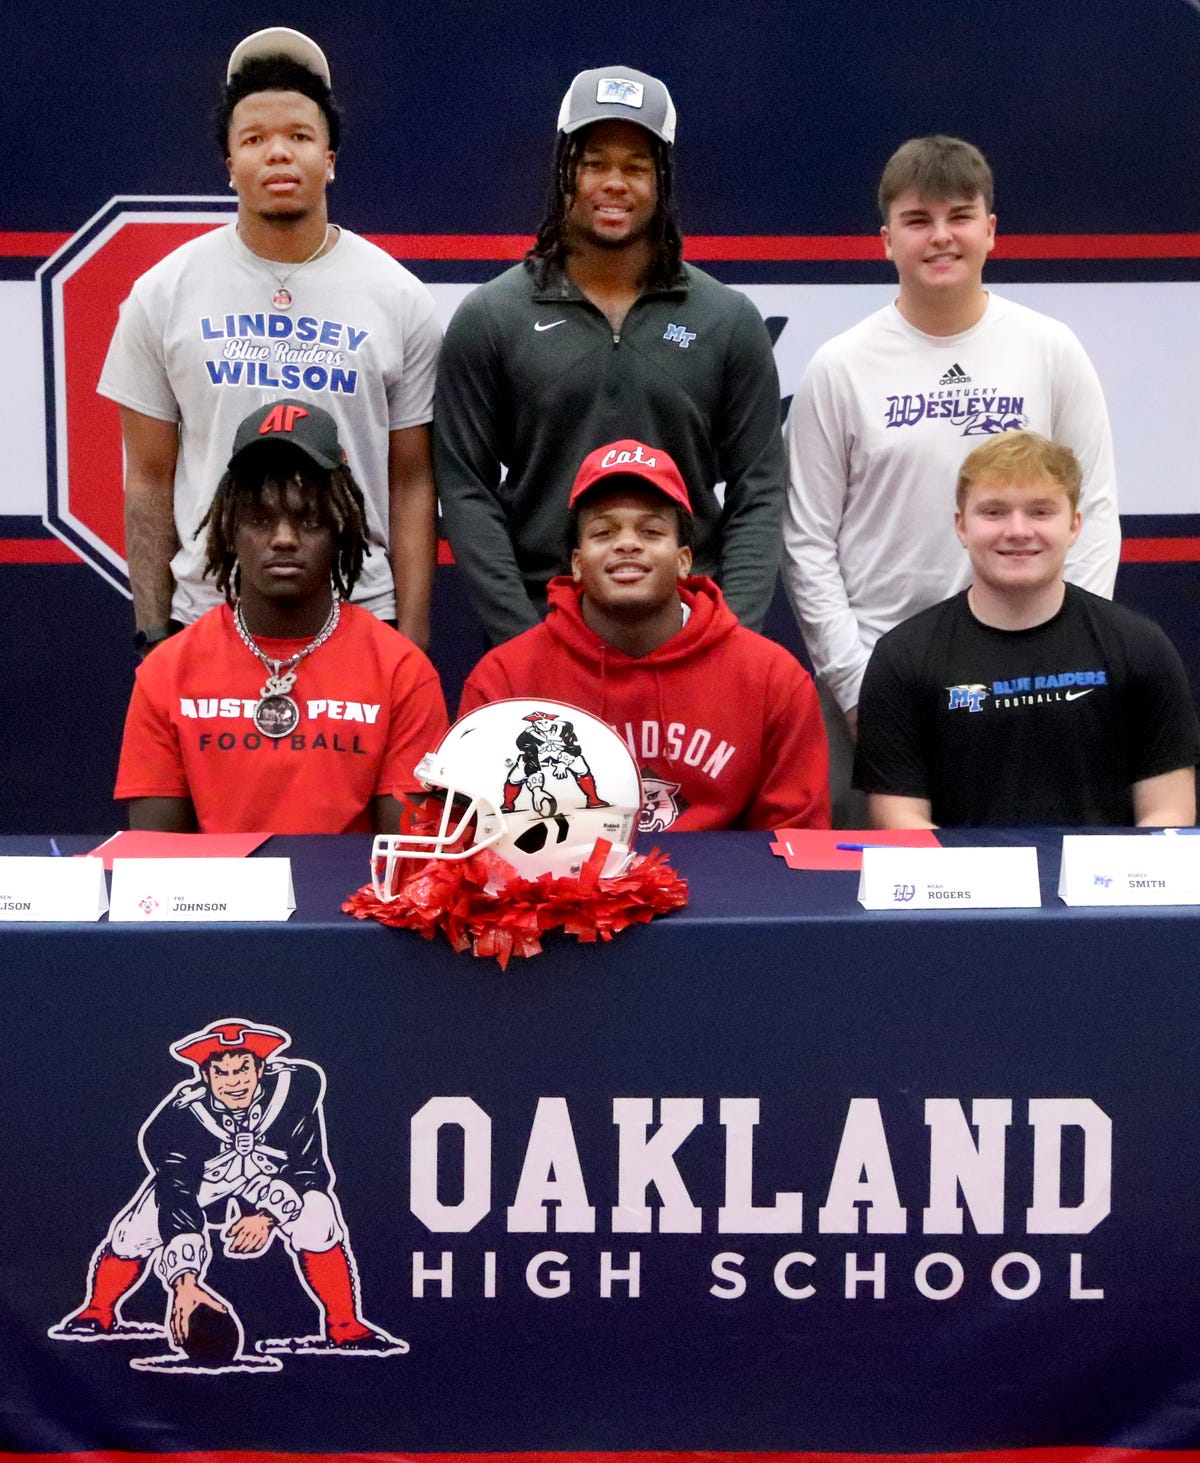 Murfreesboro area high school athletes who signed with colleges in February